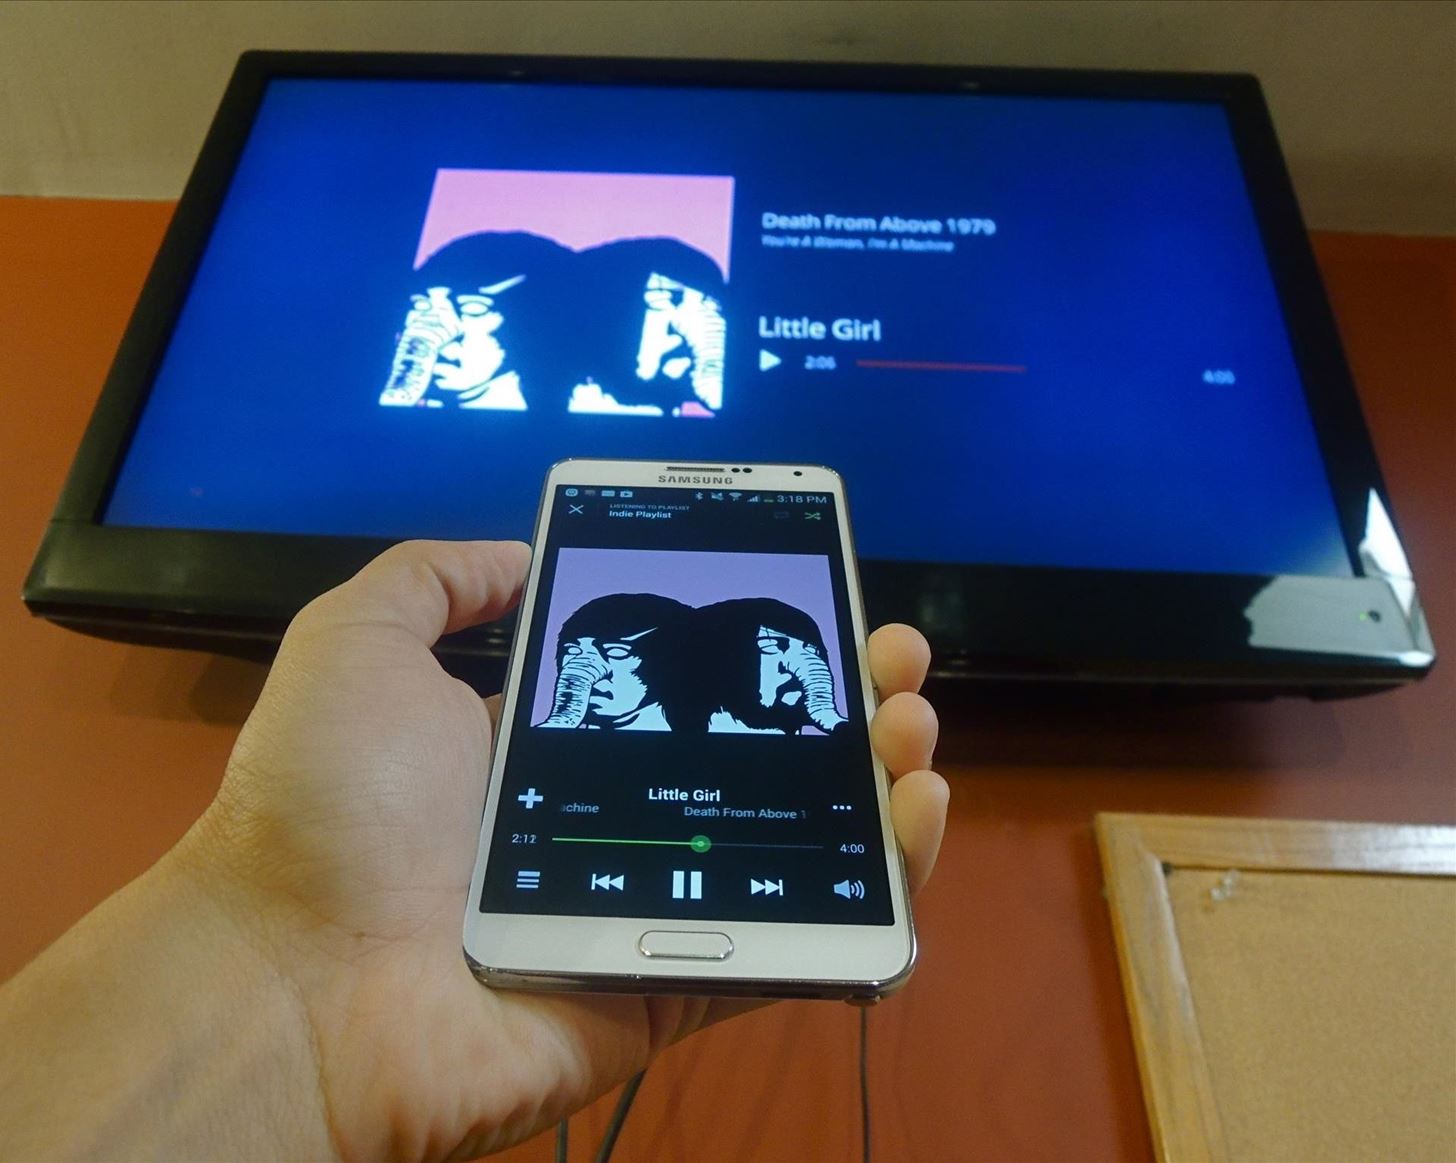 Spotify’s Connection Issue With Chromecast